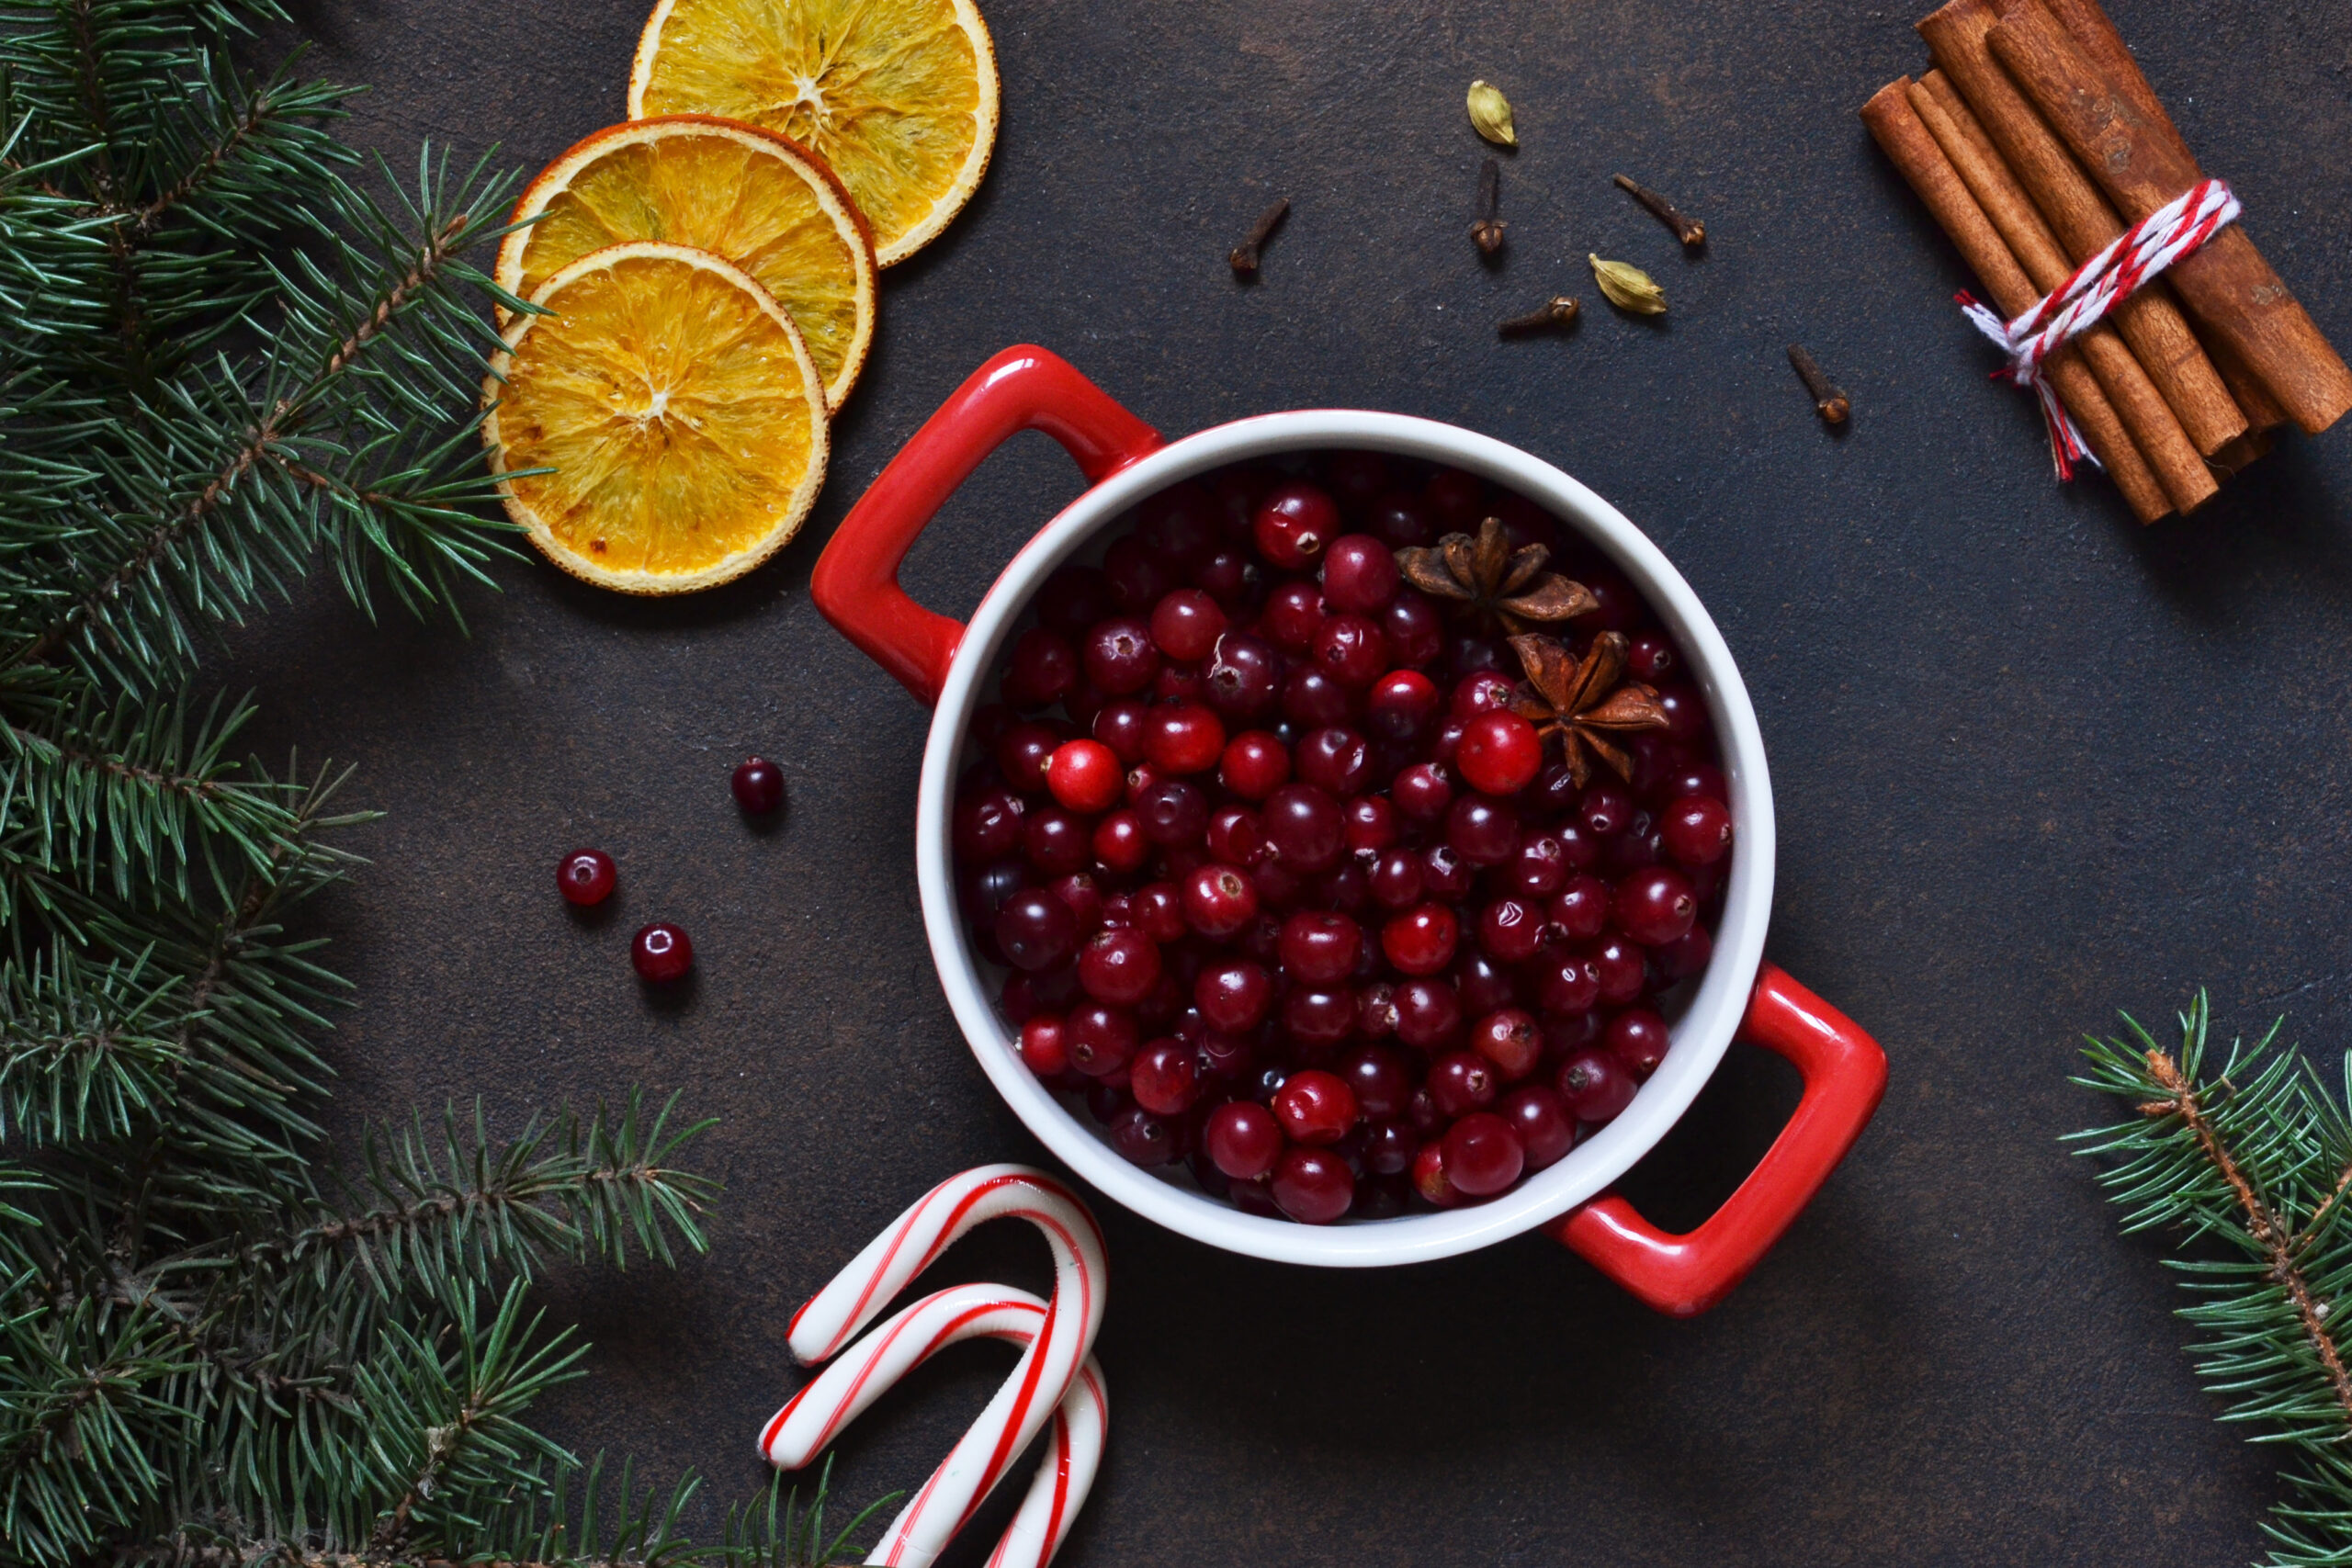 Winter cranberry dish on a dark background with orange slices, spices, and other holiday decor surrounding it.